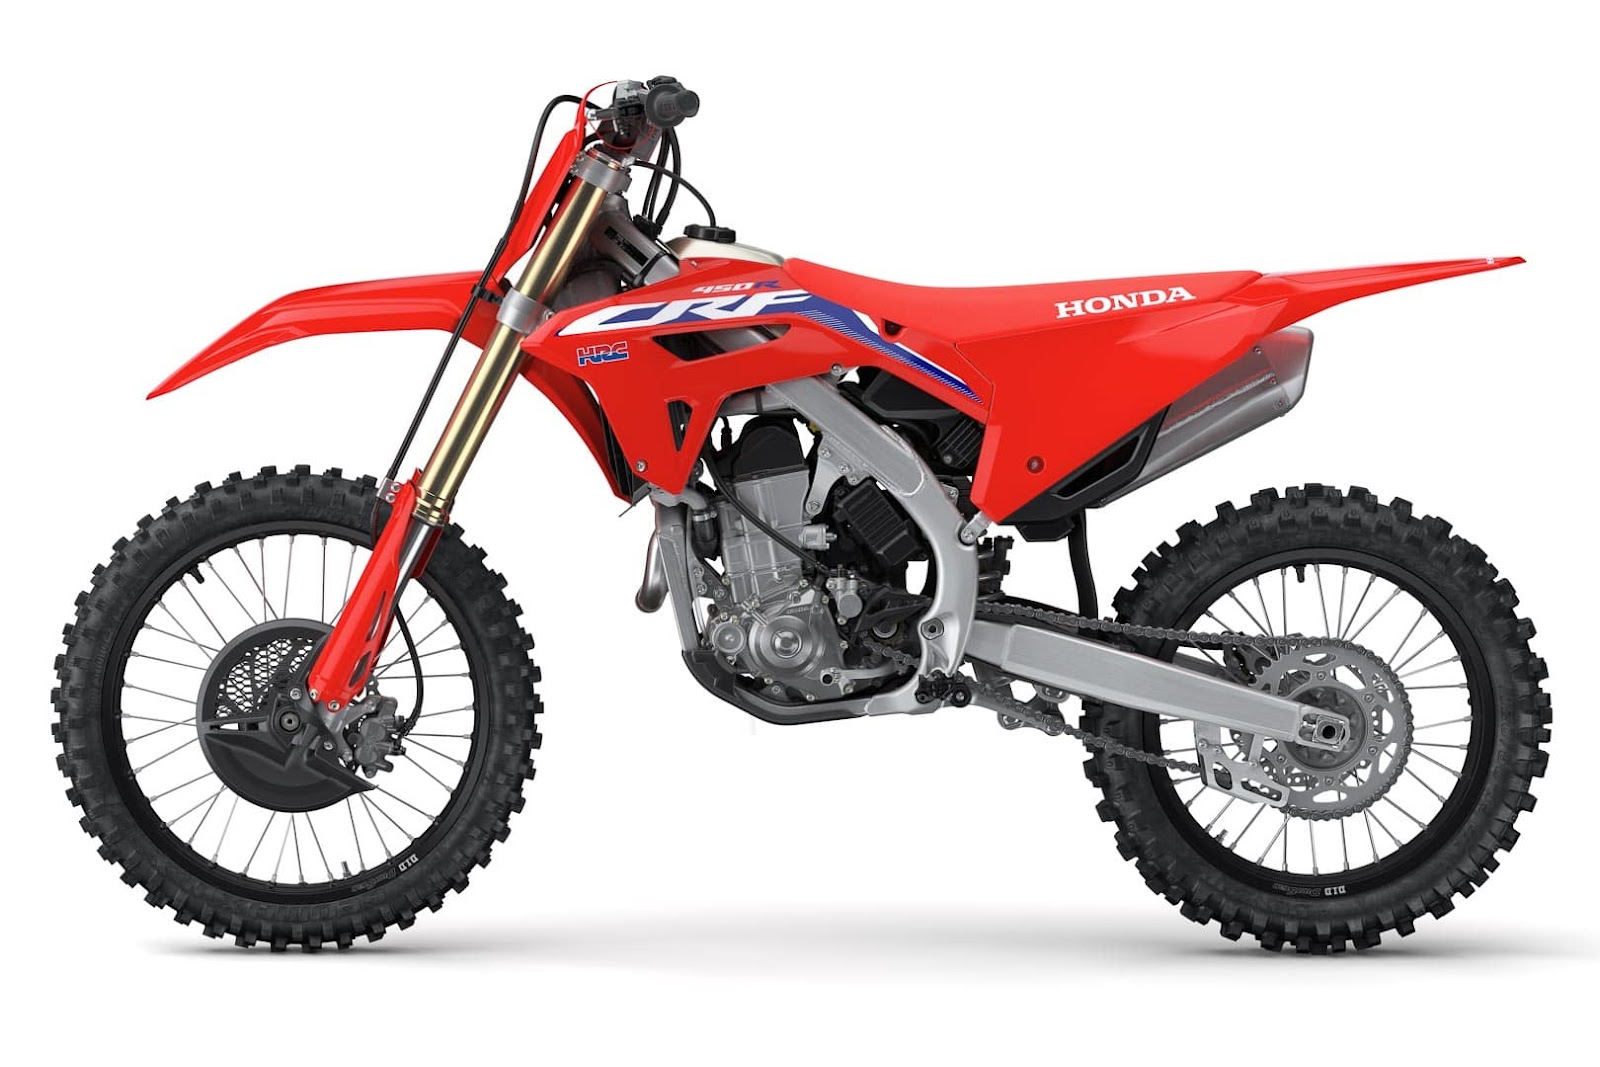 2023 bright red Honda CRF450R off-road motorcycle in a showroom